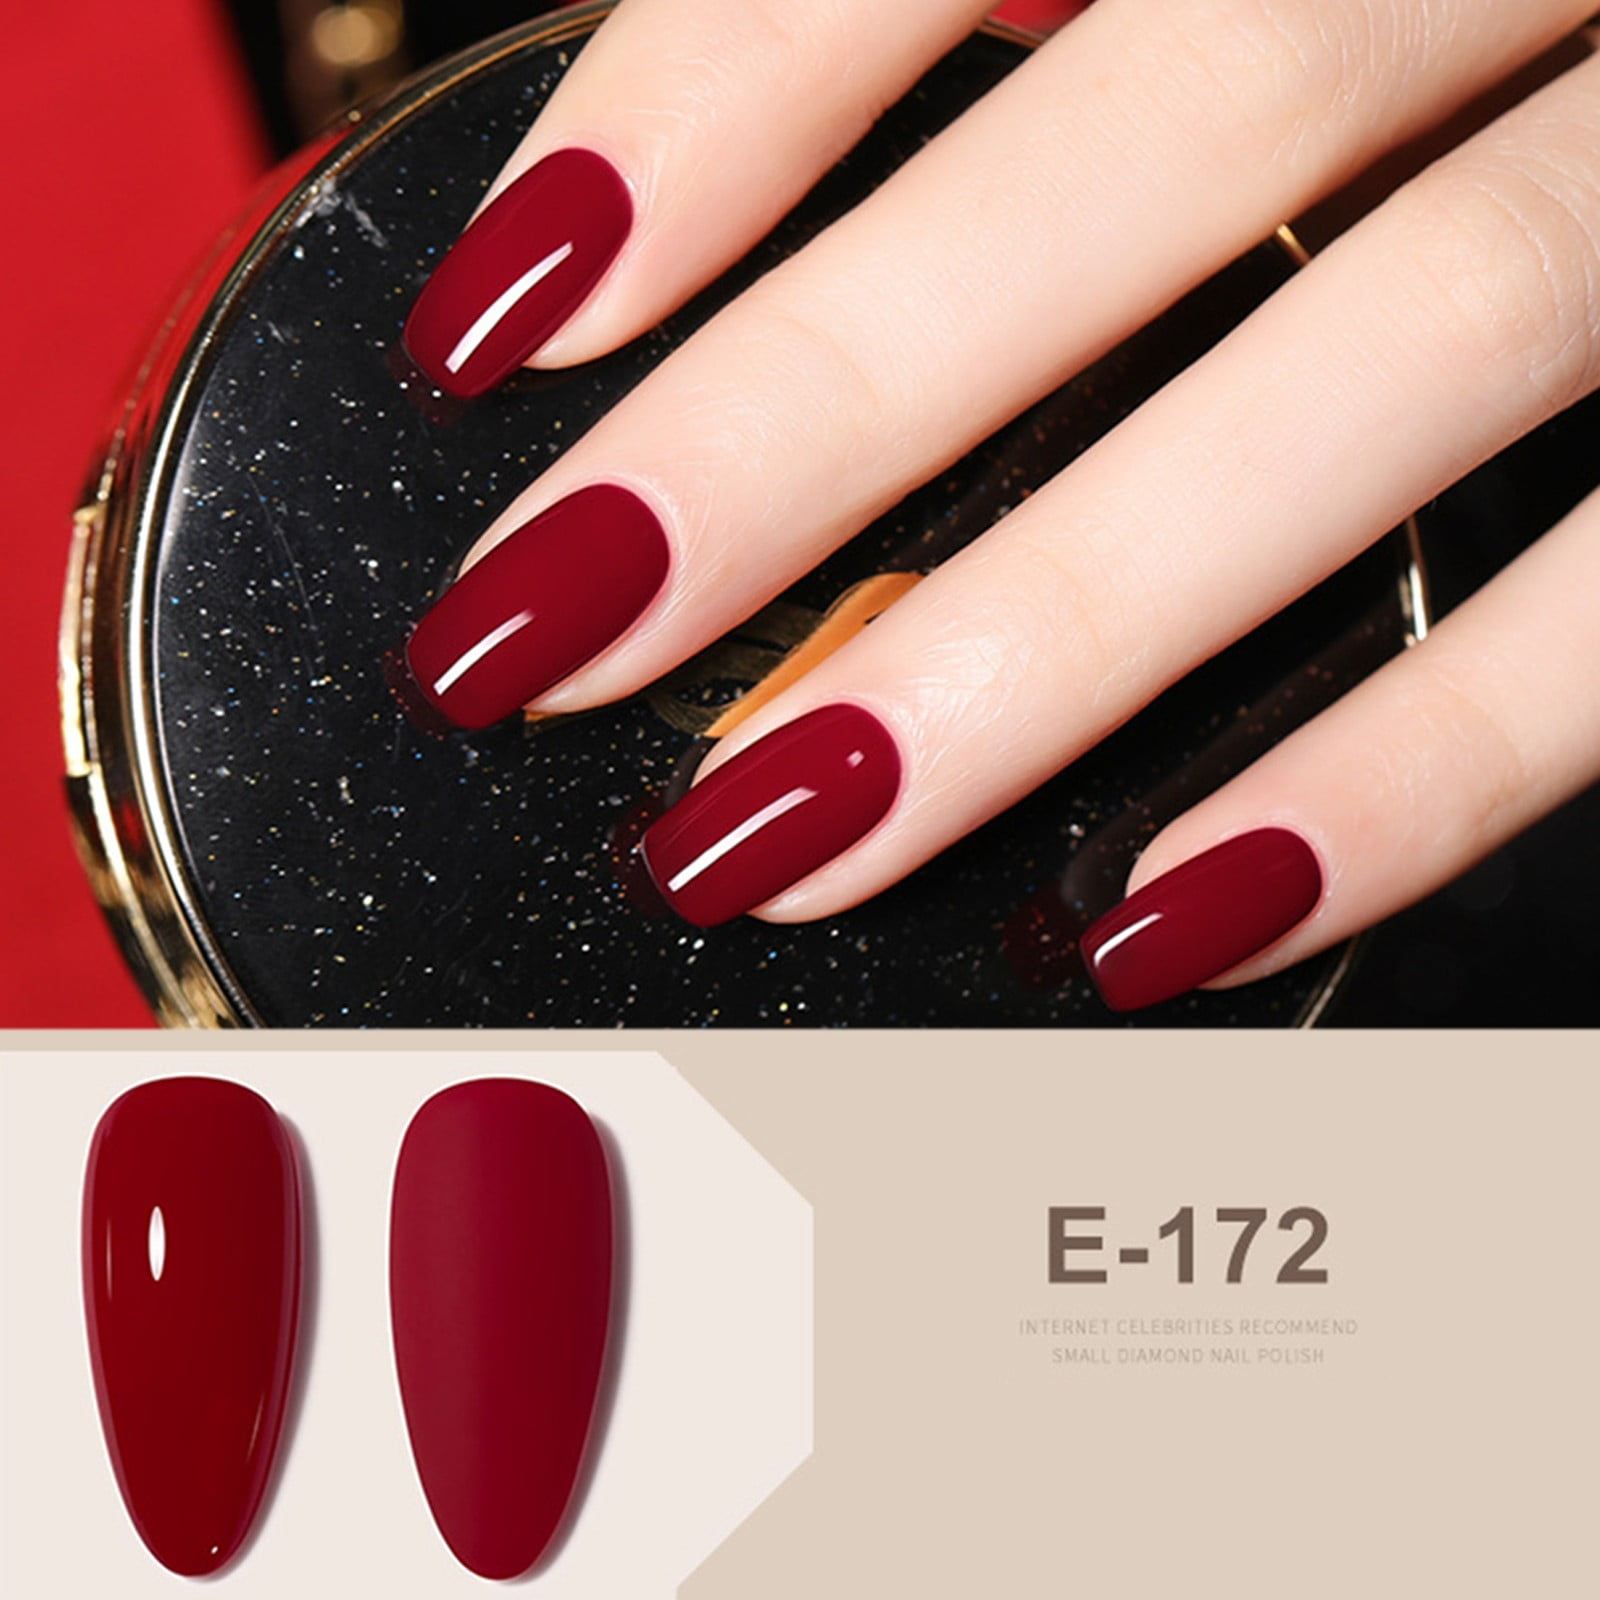 How to Get the Perfect Red Manicure at Home